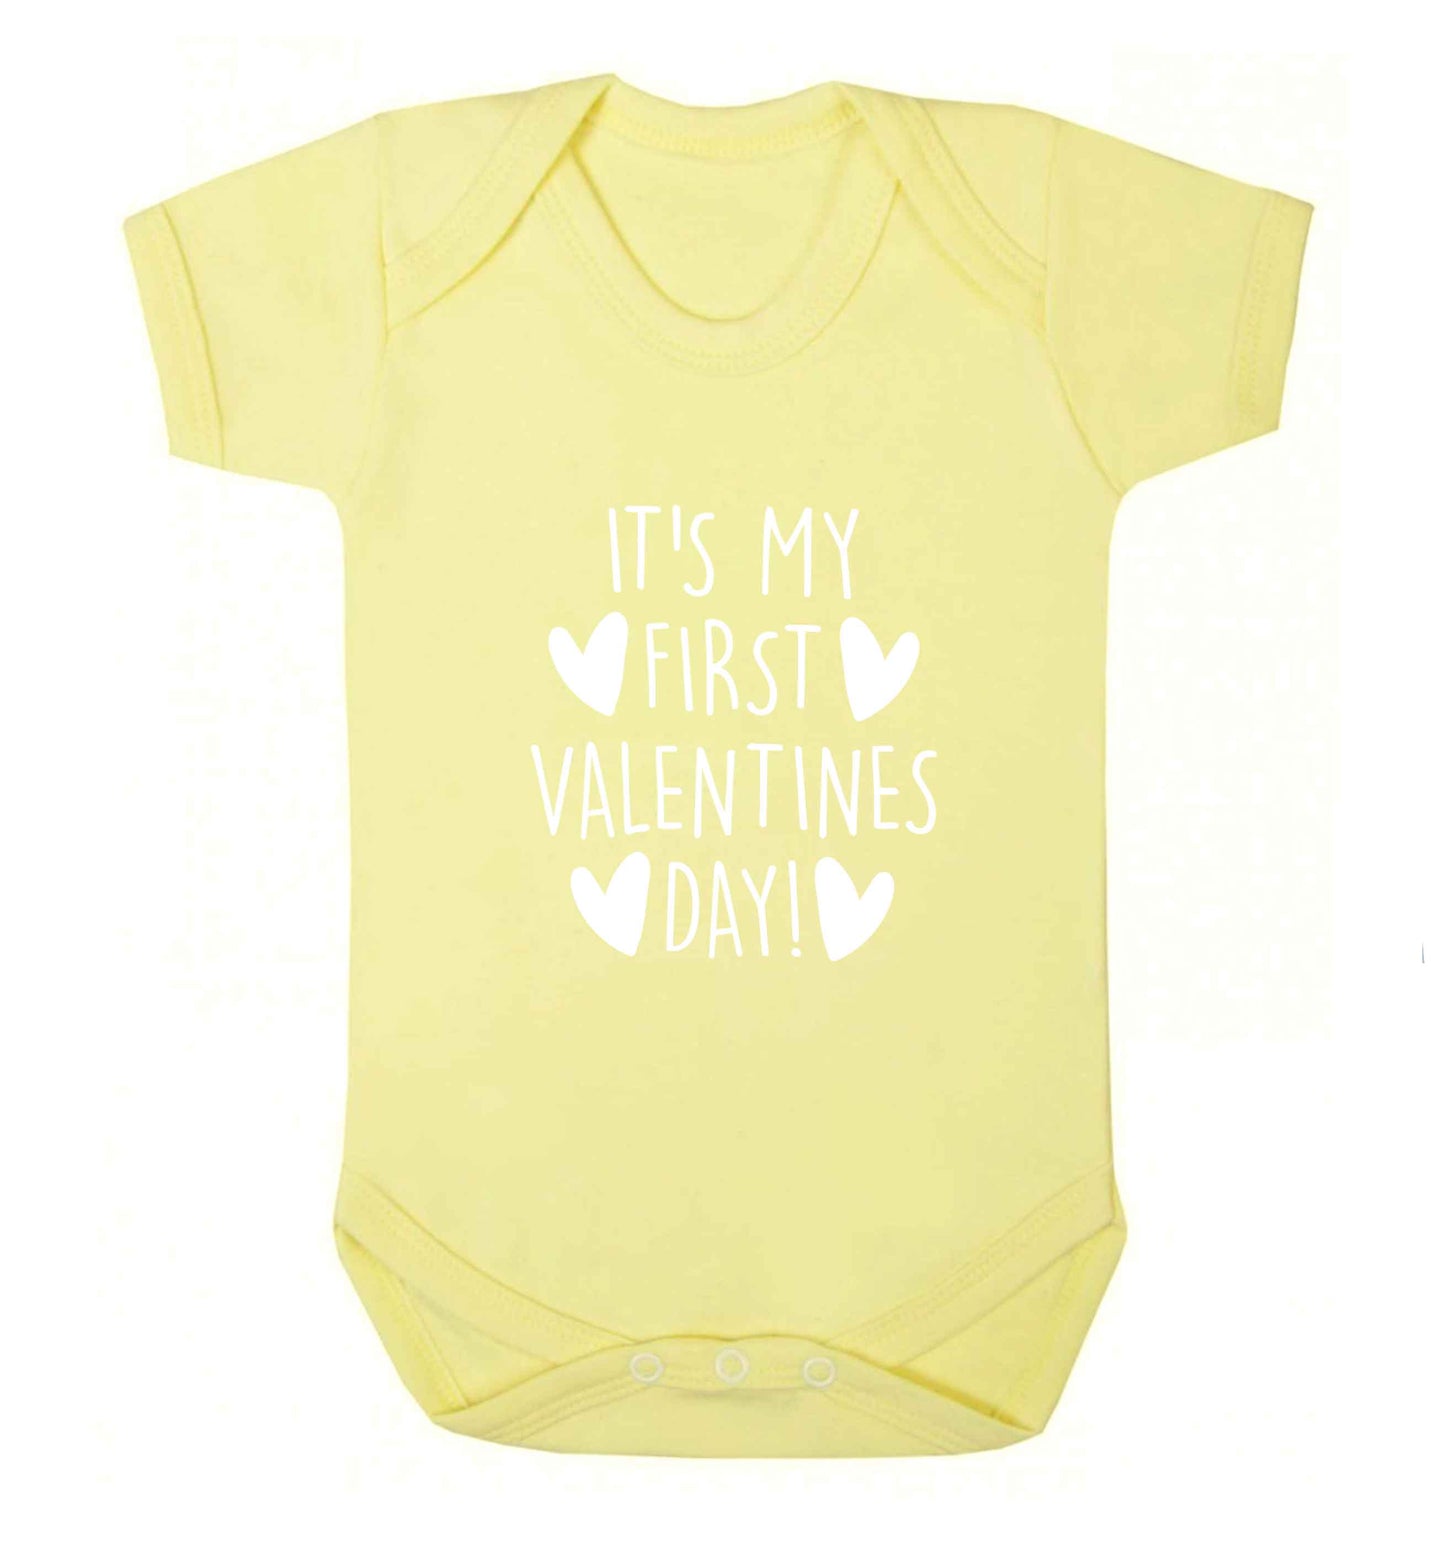 It's my first valentines day! baby vest pale yellow 18-24 months